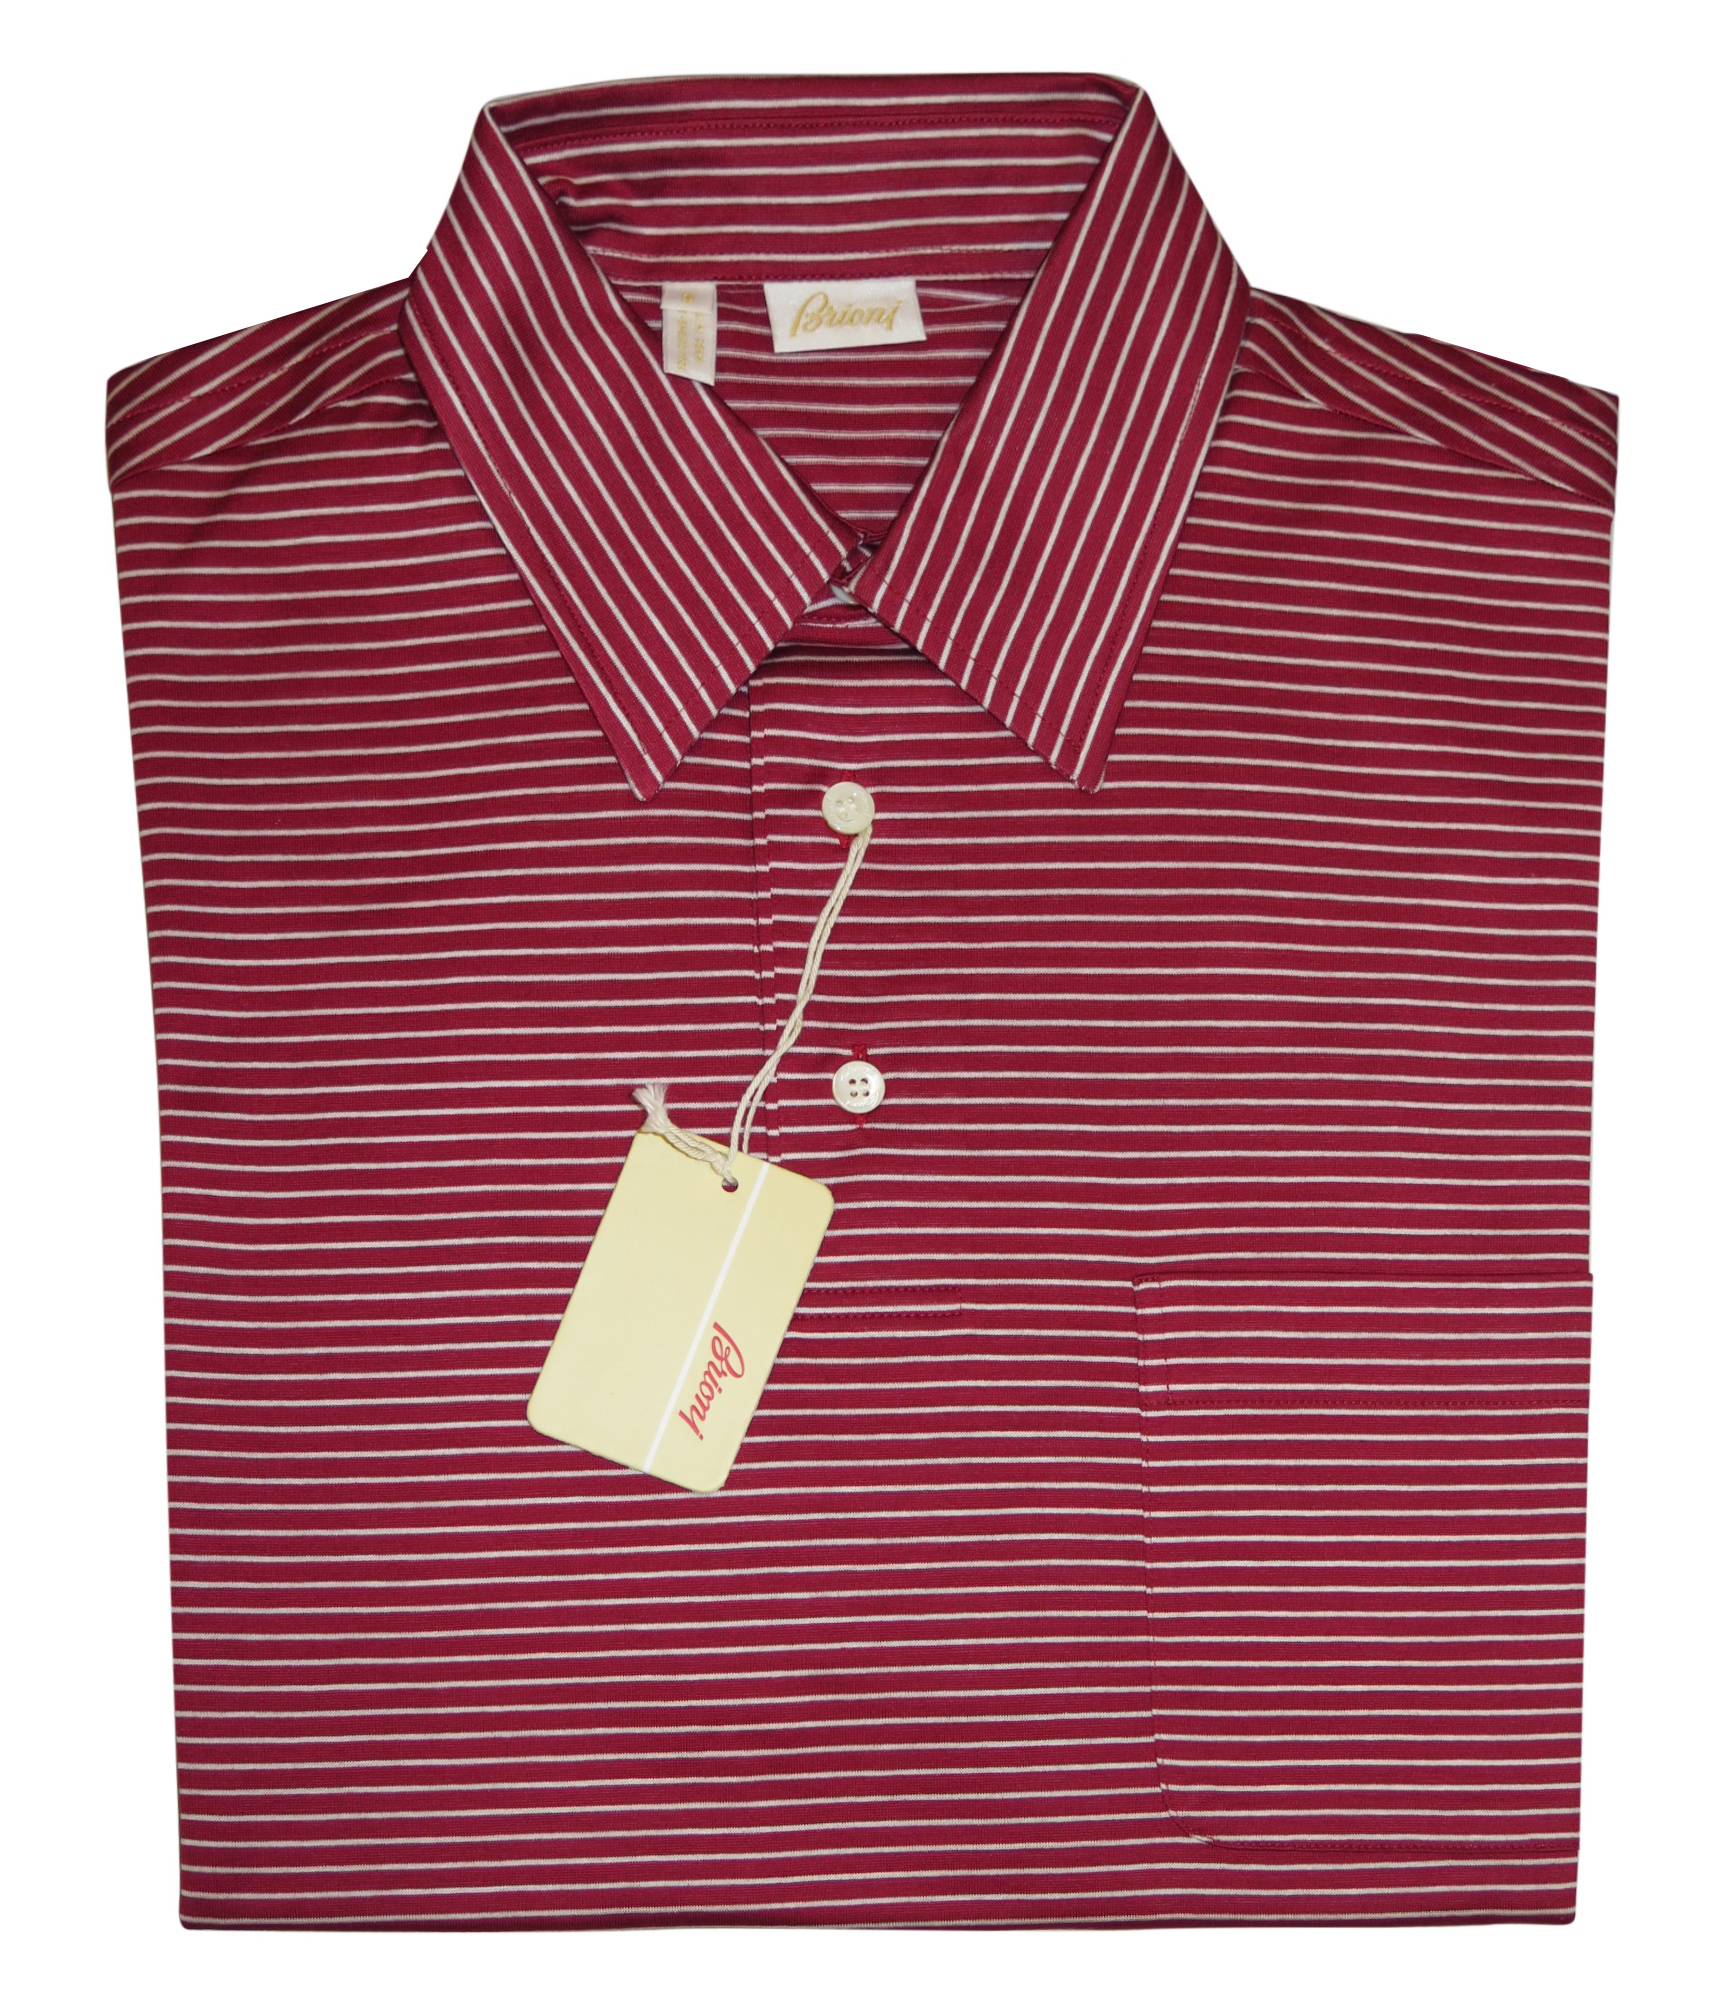 Download Brioni Men's Red Striped Cotton Polo Short Sleeve T-Shirt ...